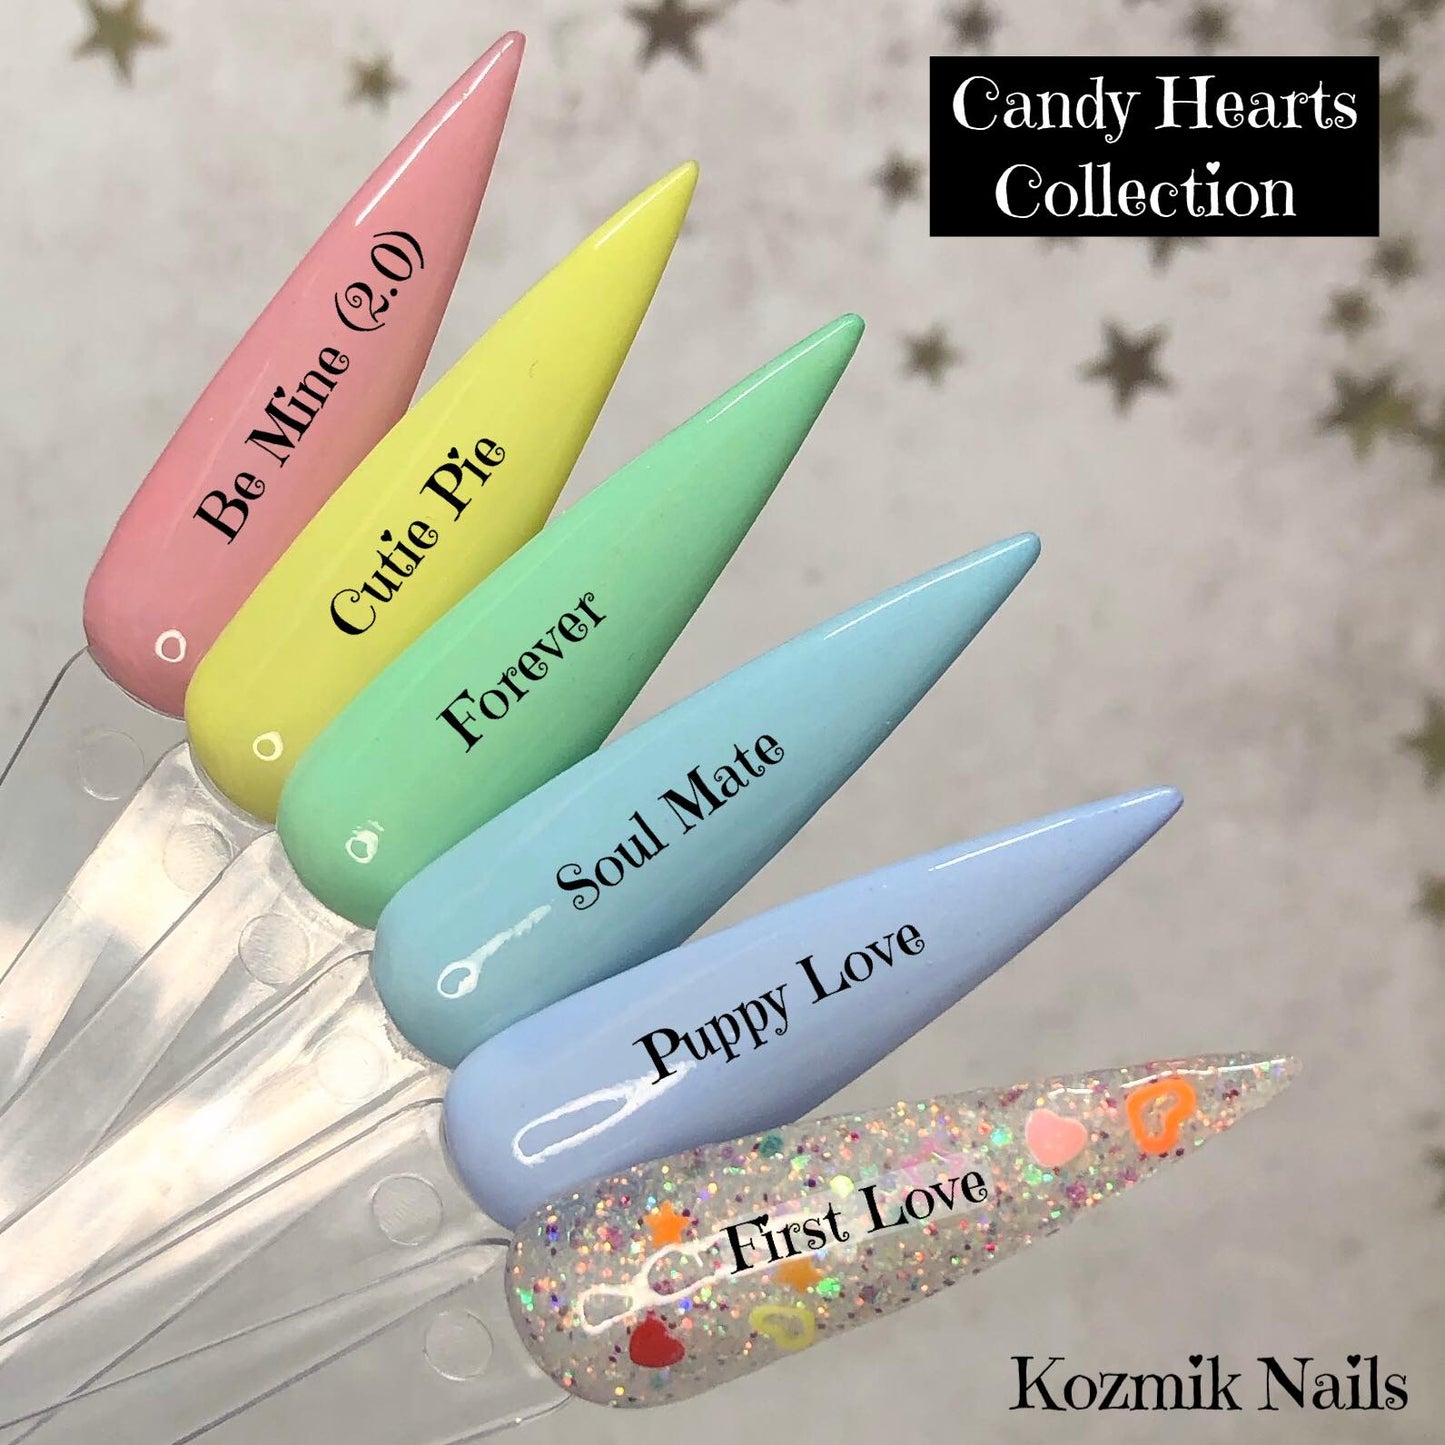 Candy Hearts Collection